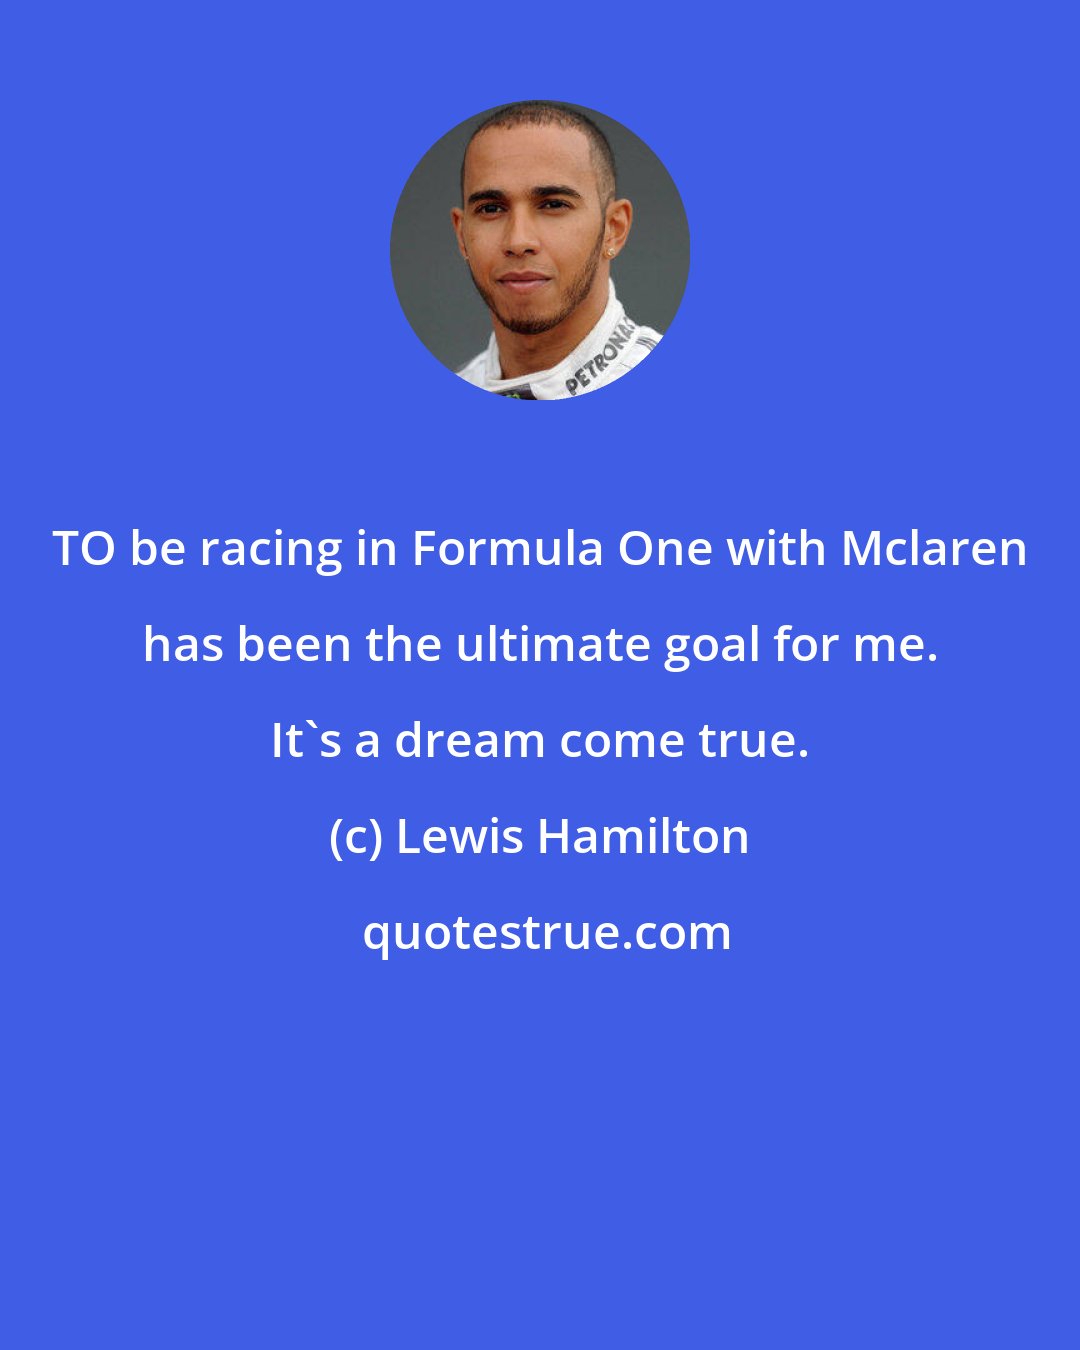 Lewis Hamilton: TO be racing in Formula One with Mclaren has been the ultimate goal for me. It's a dream come true.